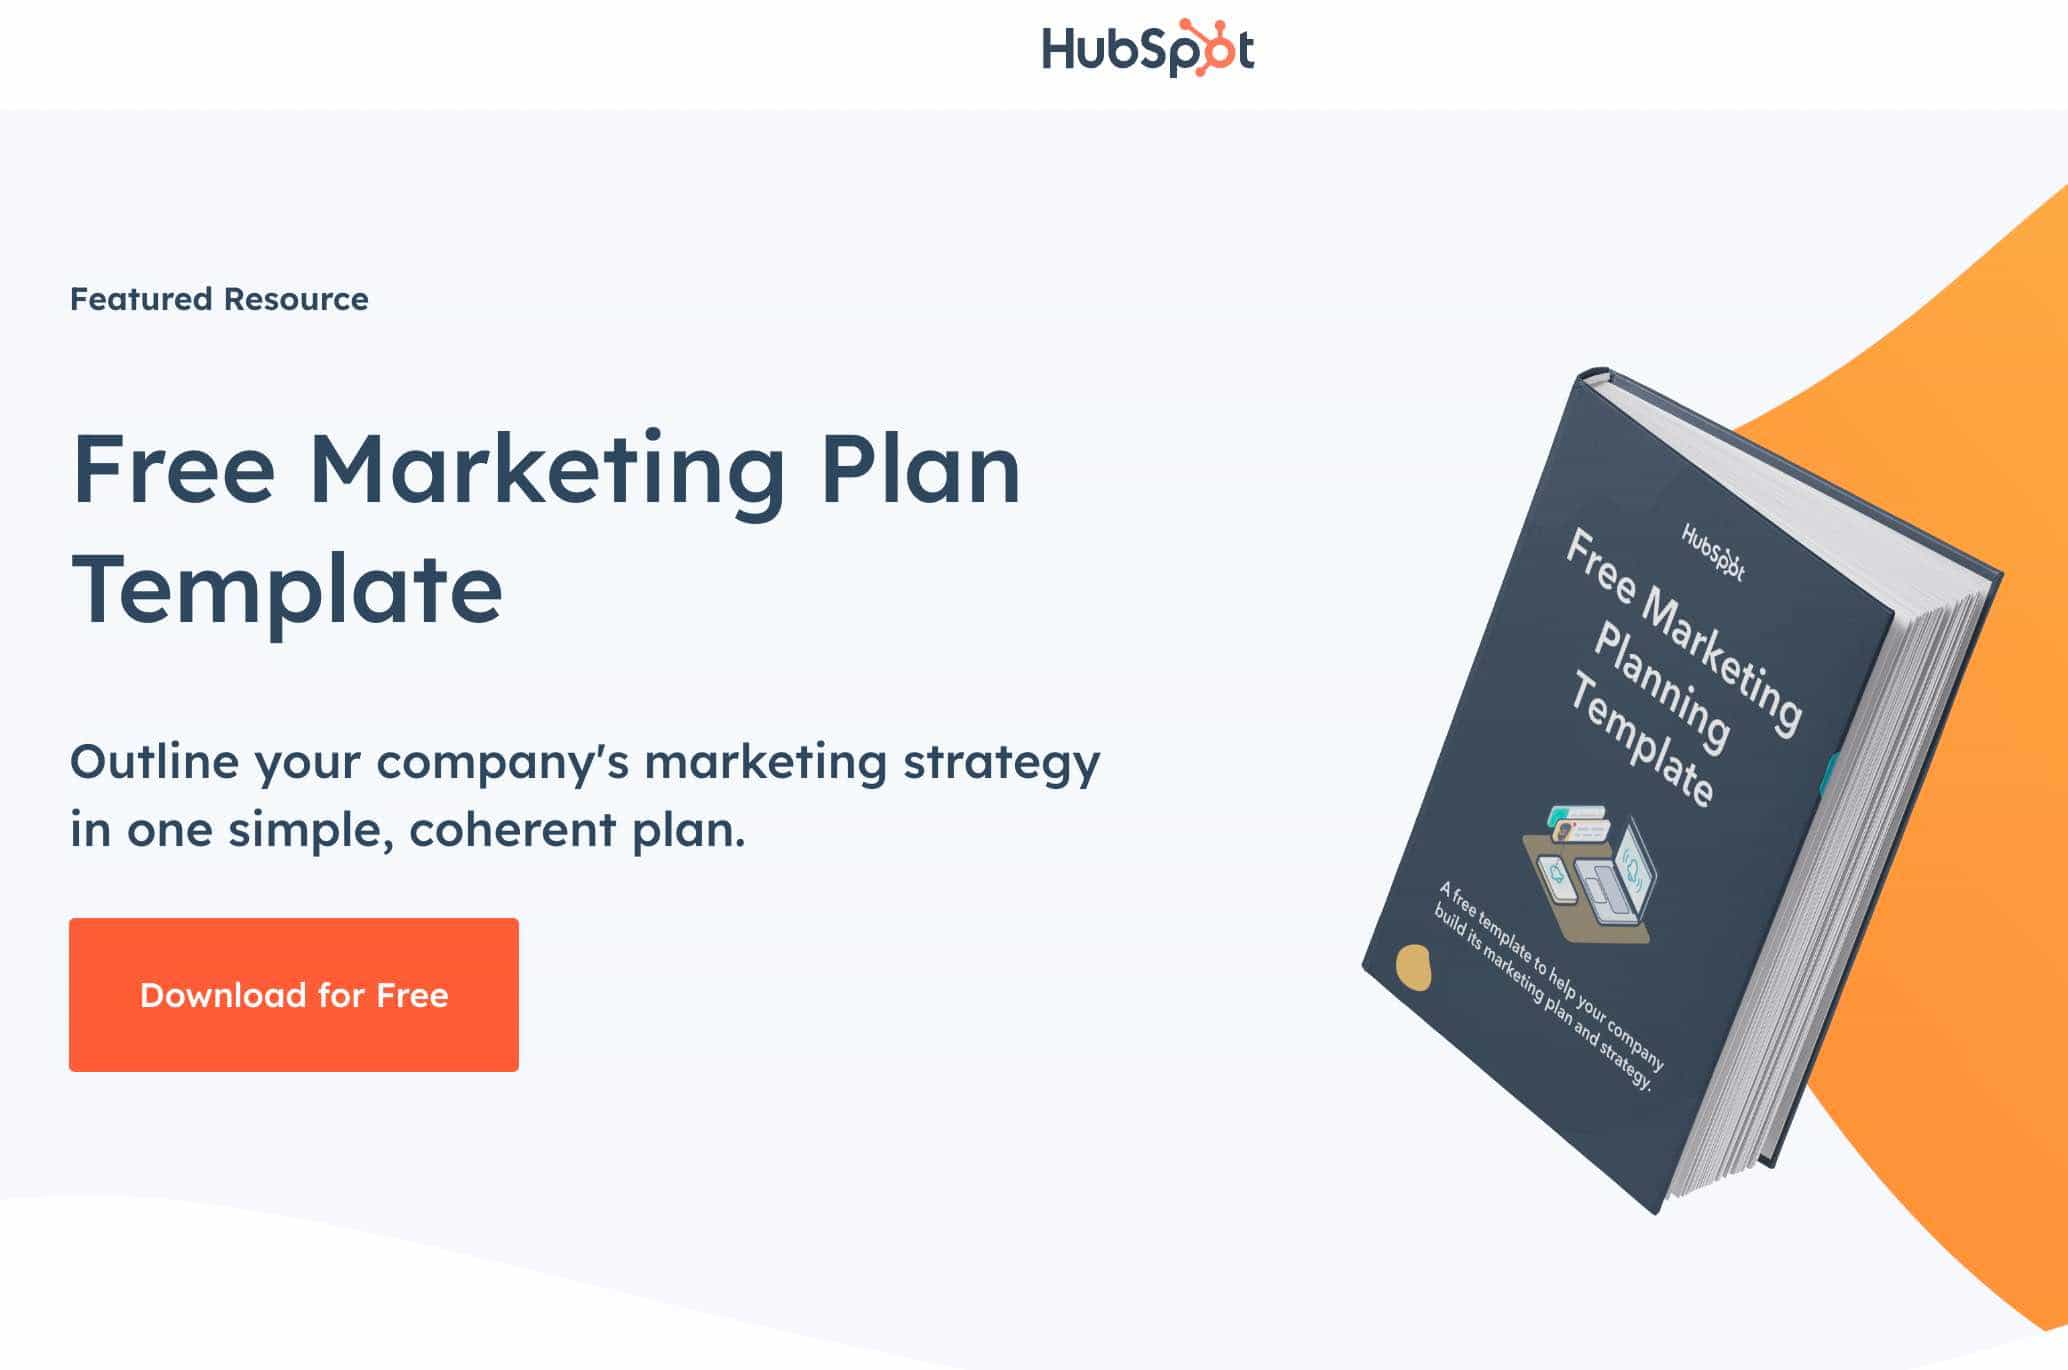 free marketing plan template from hubspot to support entrepreneurship